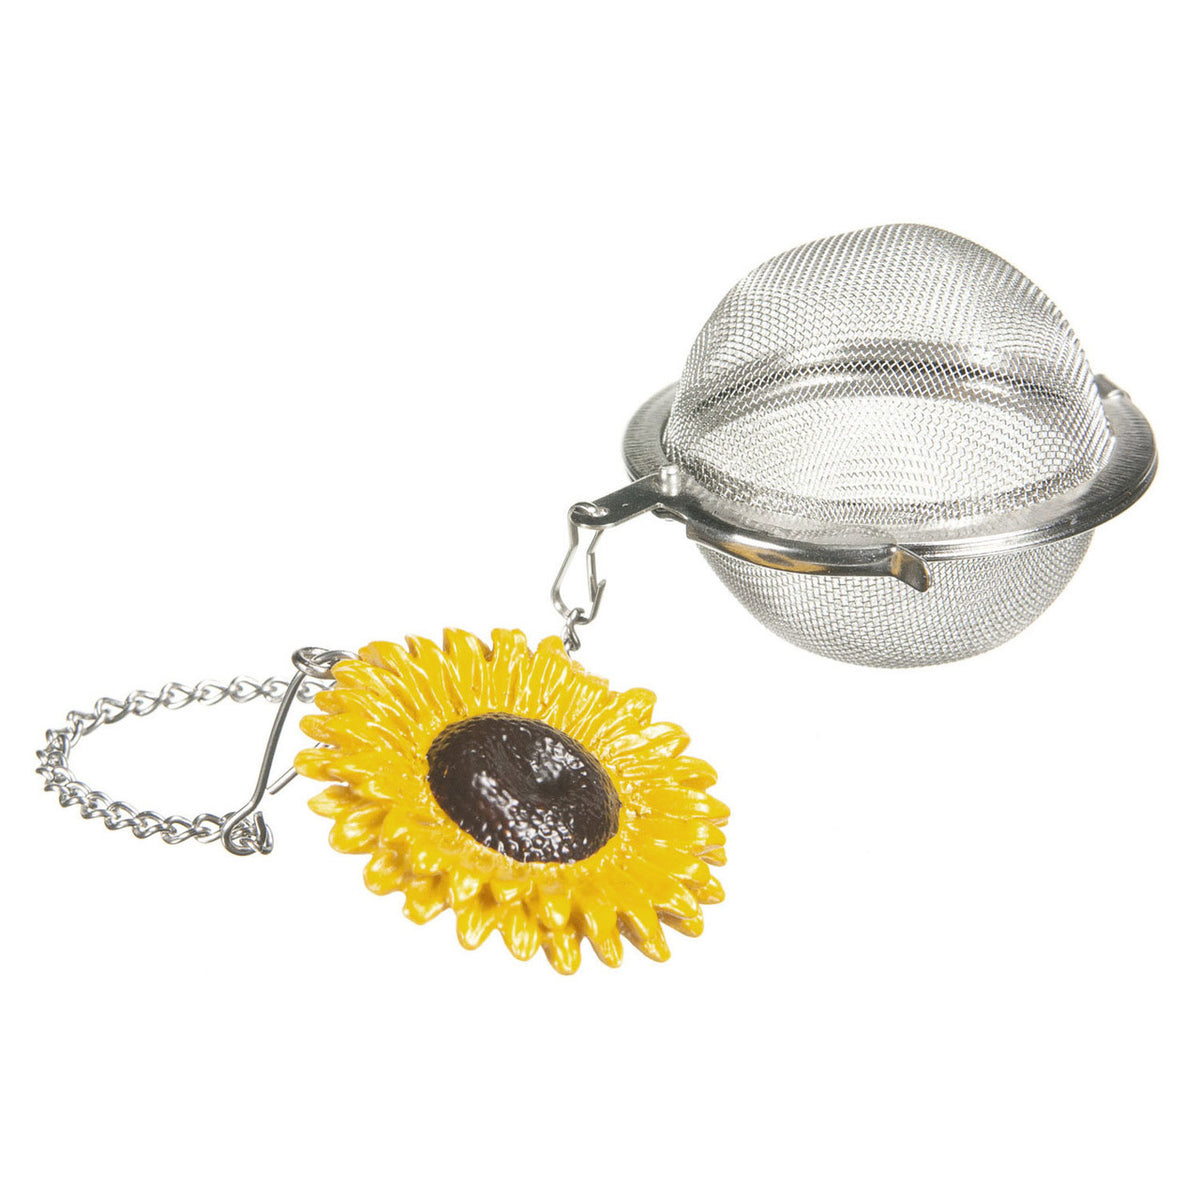 Two inch tea ball infuser with sunflower